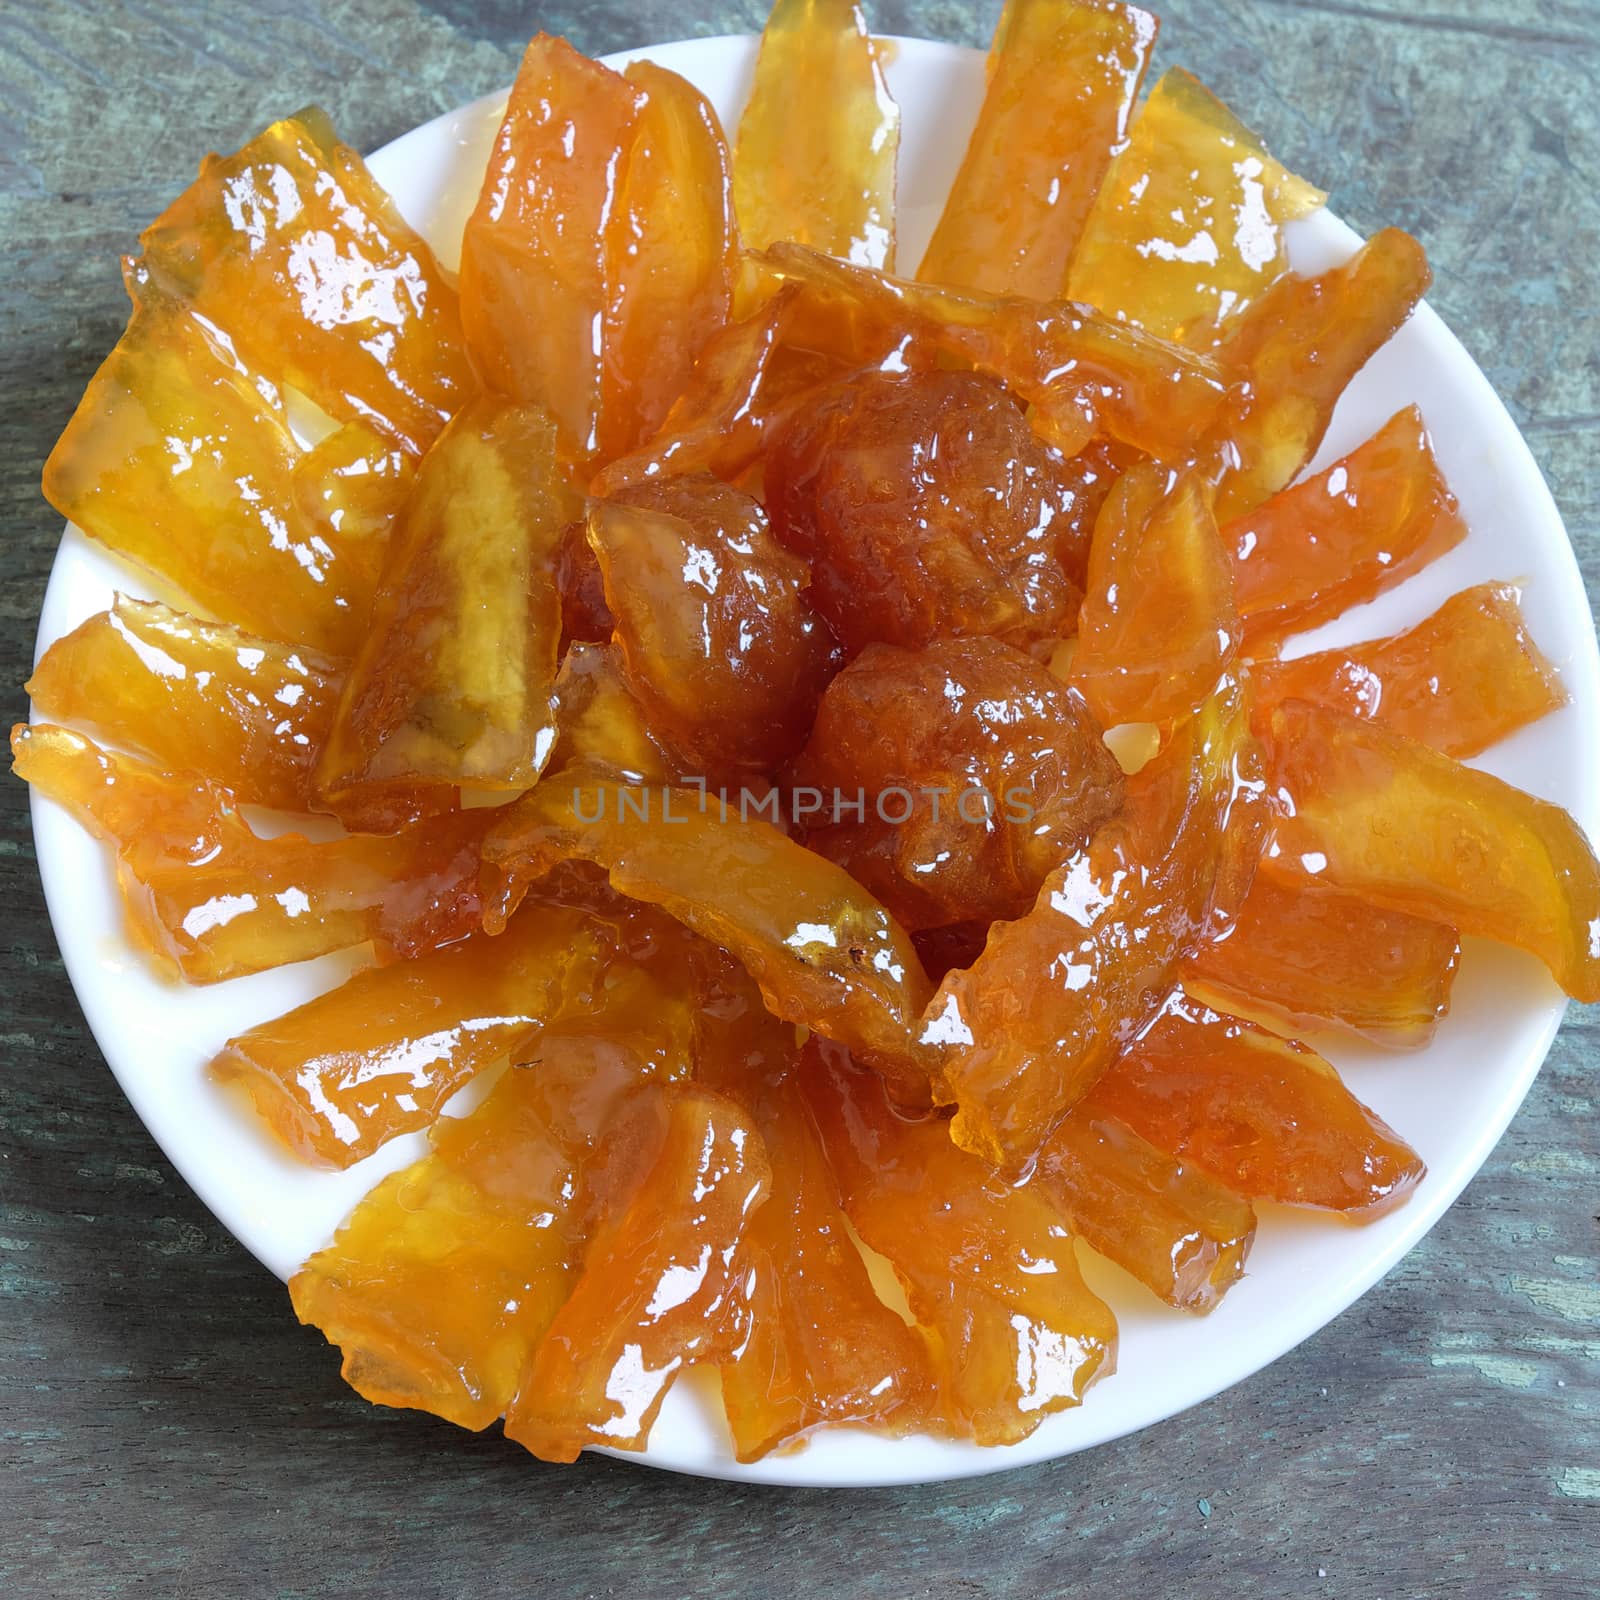 Vietnamese food for Tet holiday in spring, mango jam, sweet eating is traditional food on lunar new year, can make from mango fruit cook with sugar,  amazing background for Vietnam culture